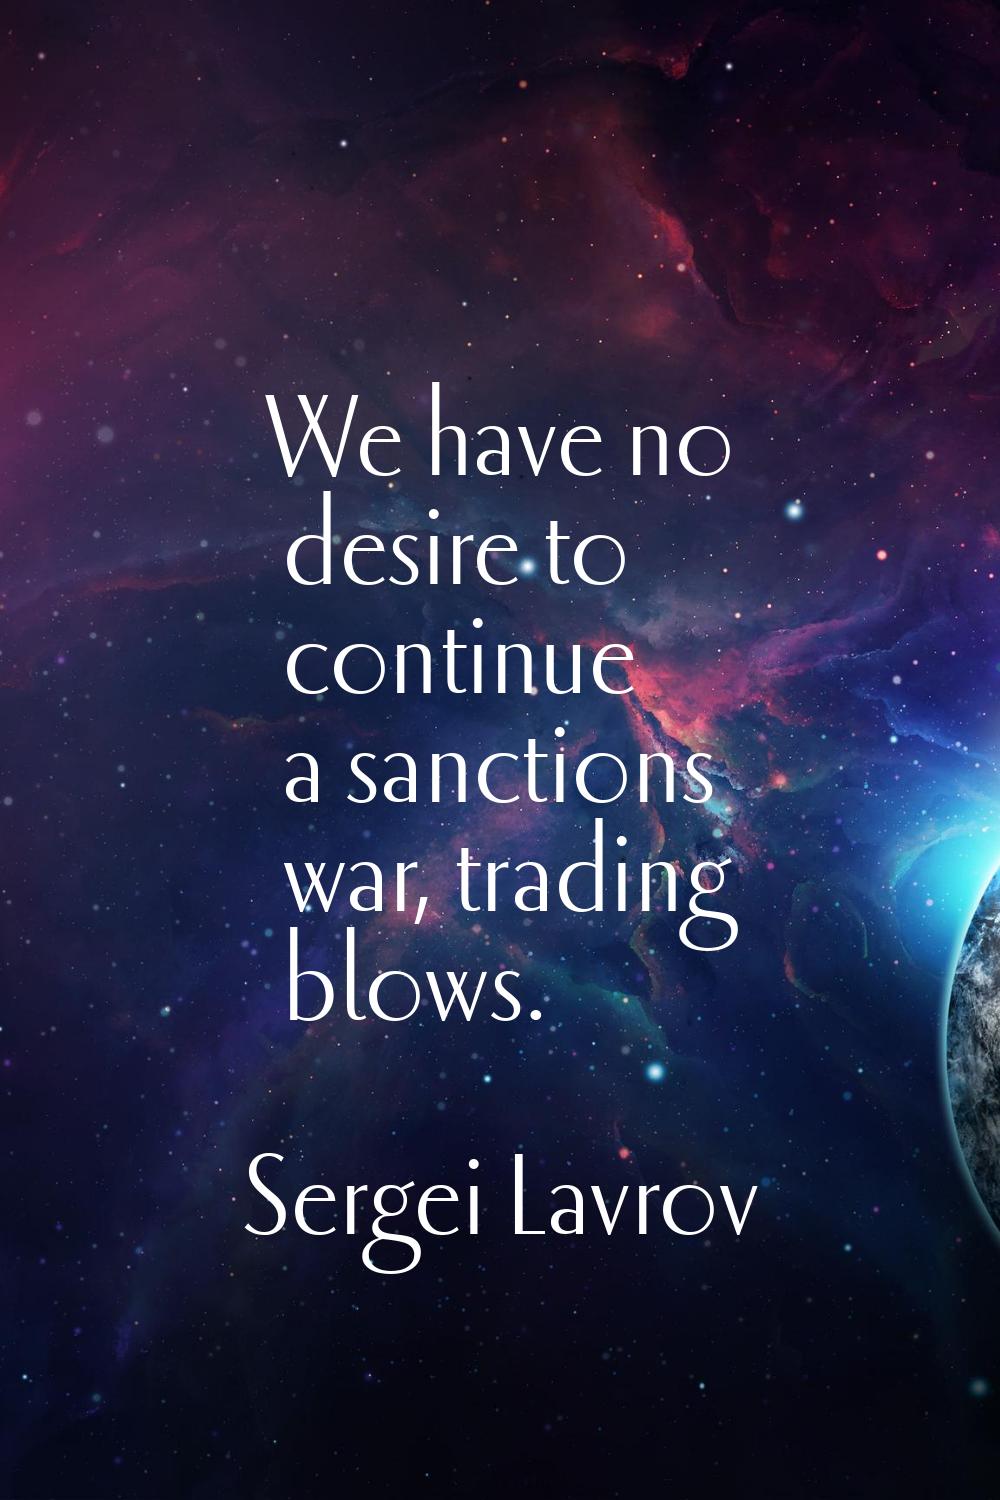 We have no desire to continue a sanctions war, trading blows.